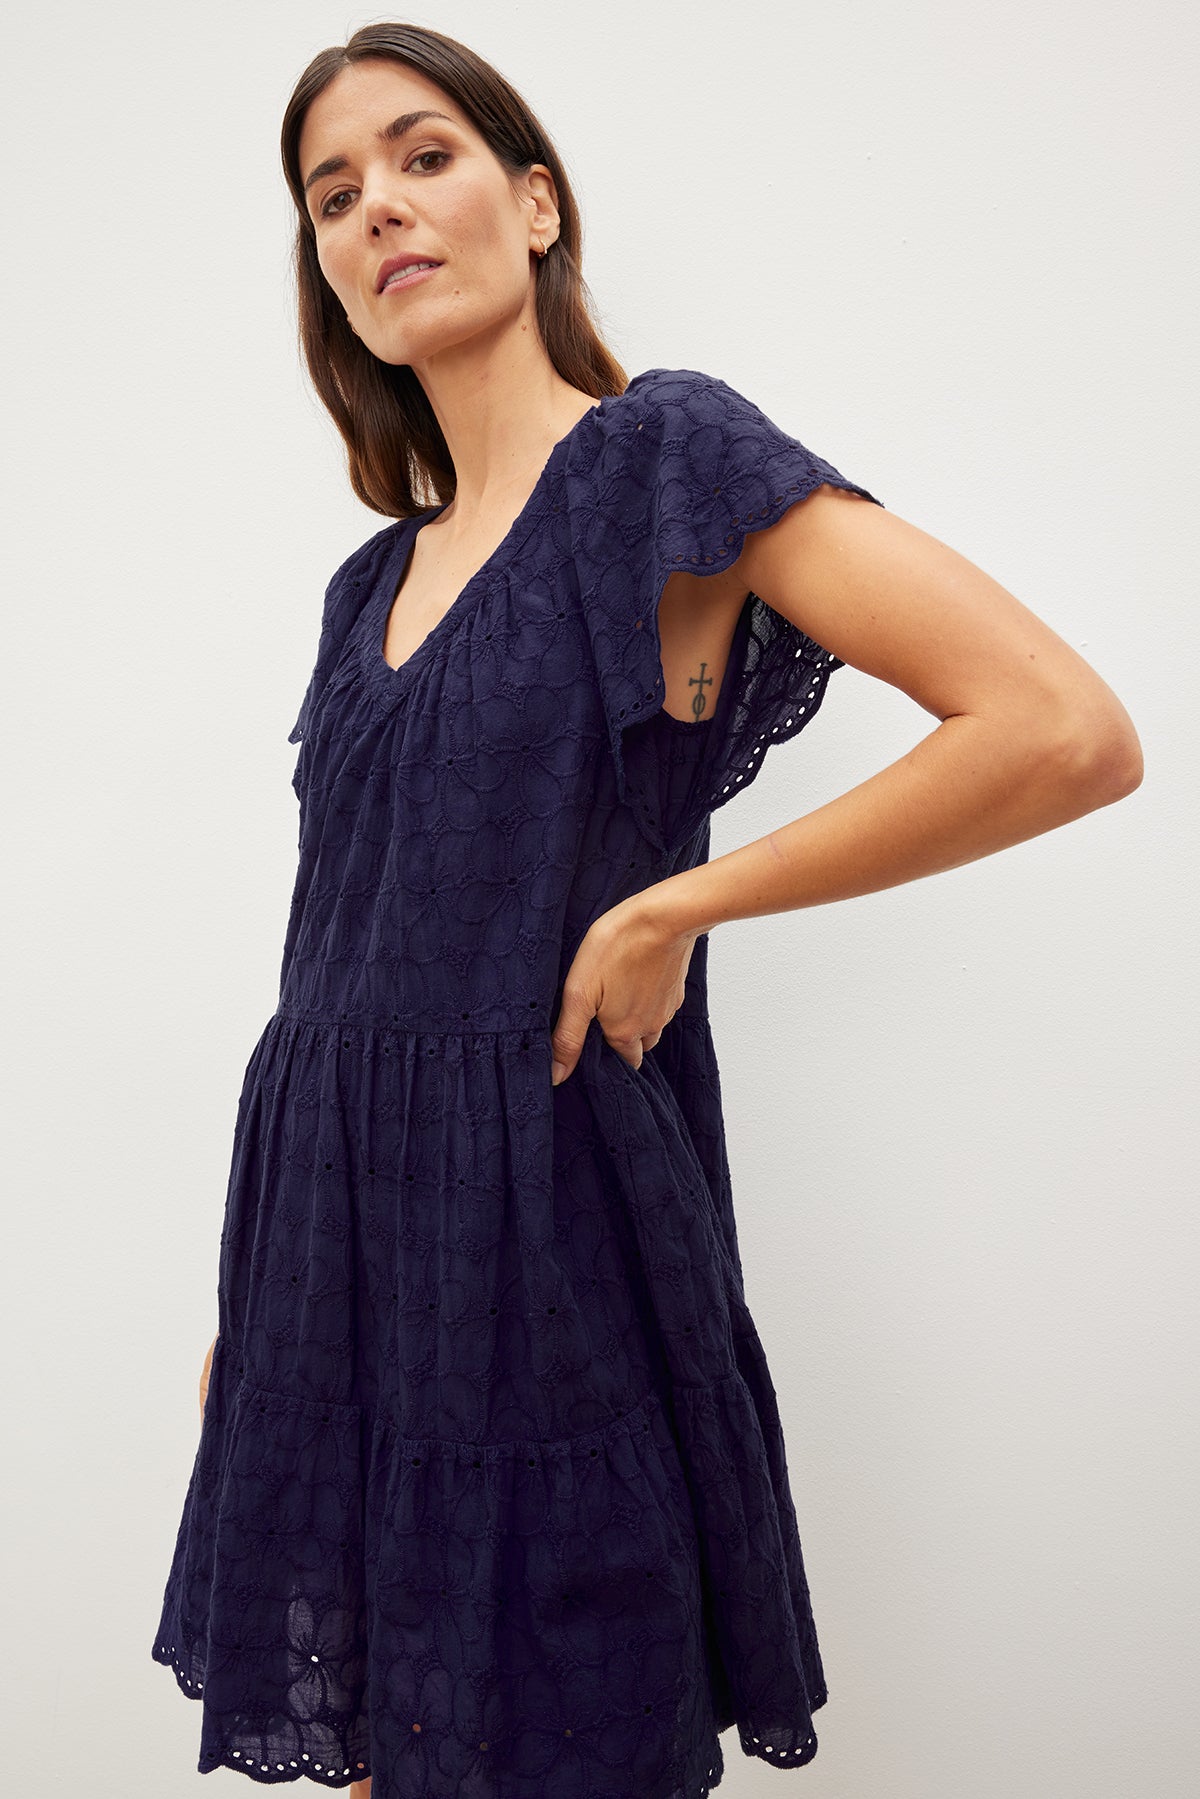 The model is wearing a Velvet by Graham & Spencer WYNETTE EMBROIDERED COTTON DRESS with flutter sleeves and a ruffled hem.-35967521587393